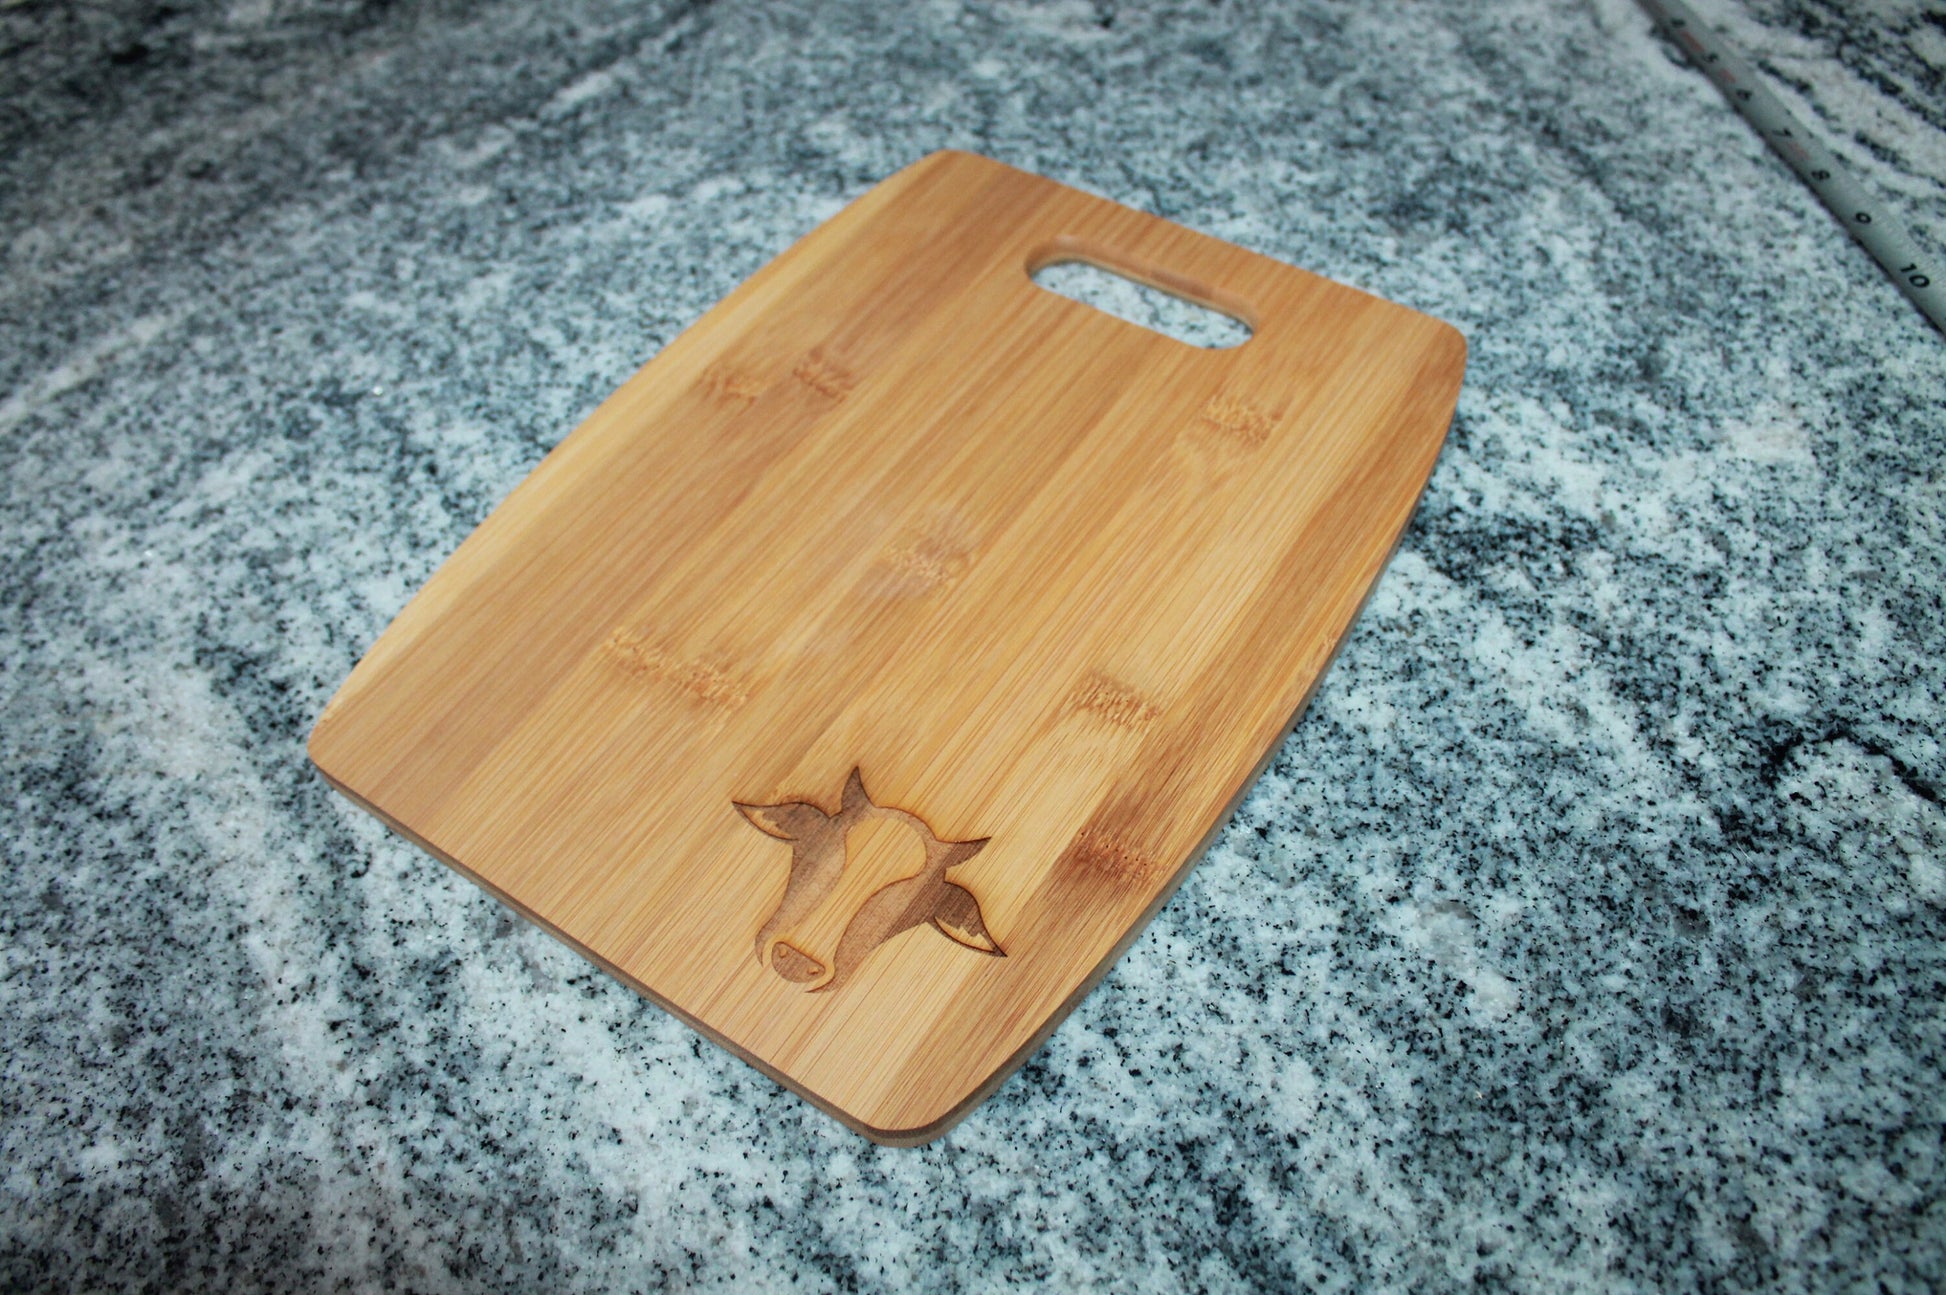 Wooden Engraved Cutting Board Cow Heifer Kitchen Cow Animal Lover Hostess Housewarming Gift Culinary Hardwood Farm Life Country Rustic